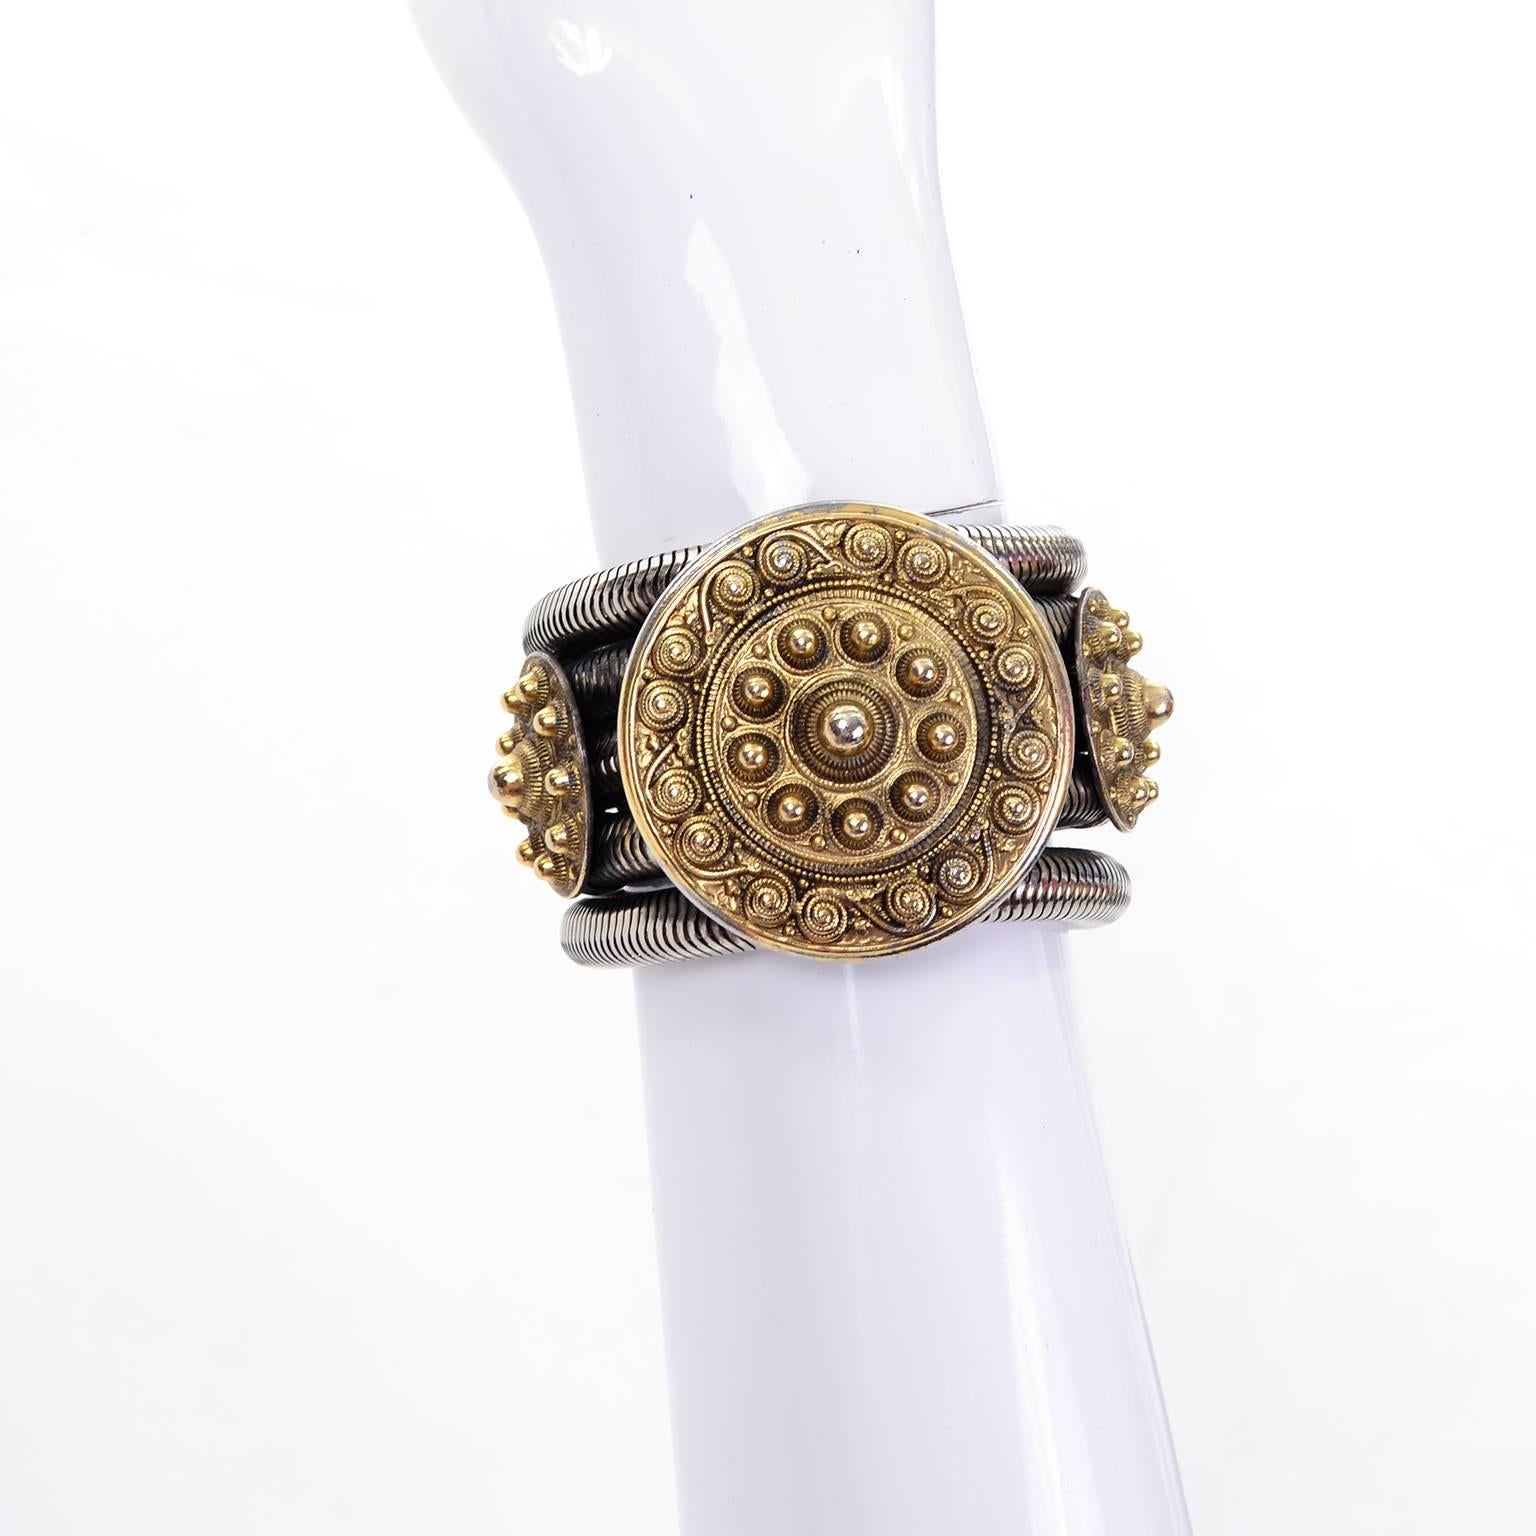 This is such a unique and stunning 1980's vintage bracelet designed by Edouard Rambaud Paris, comprised of five silver tone serpentine metal coils connected by the three central gold tone circles. The central circle has a smaller circle on either